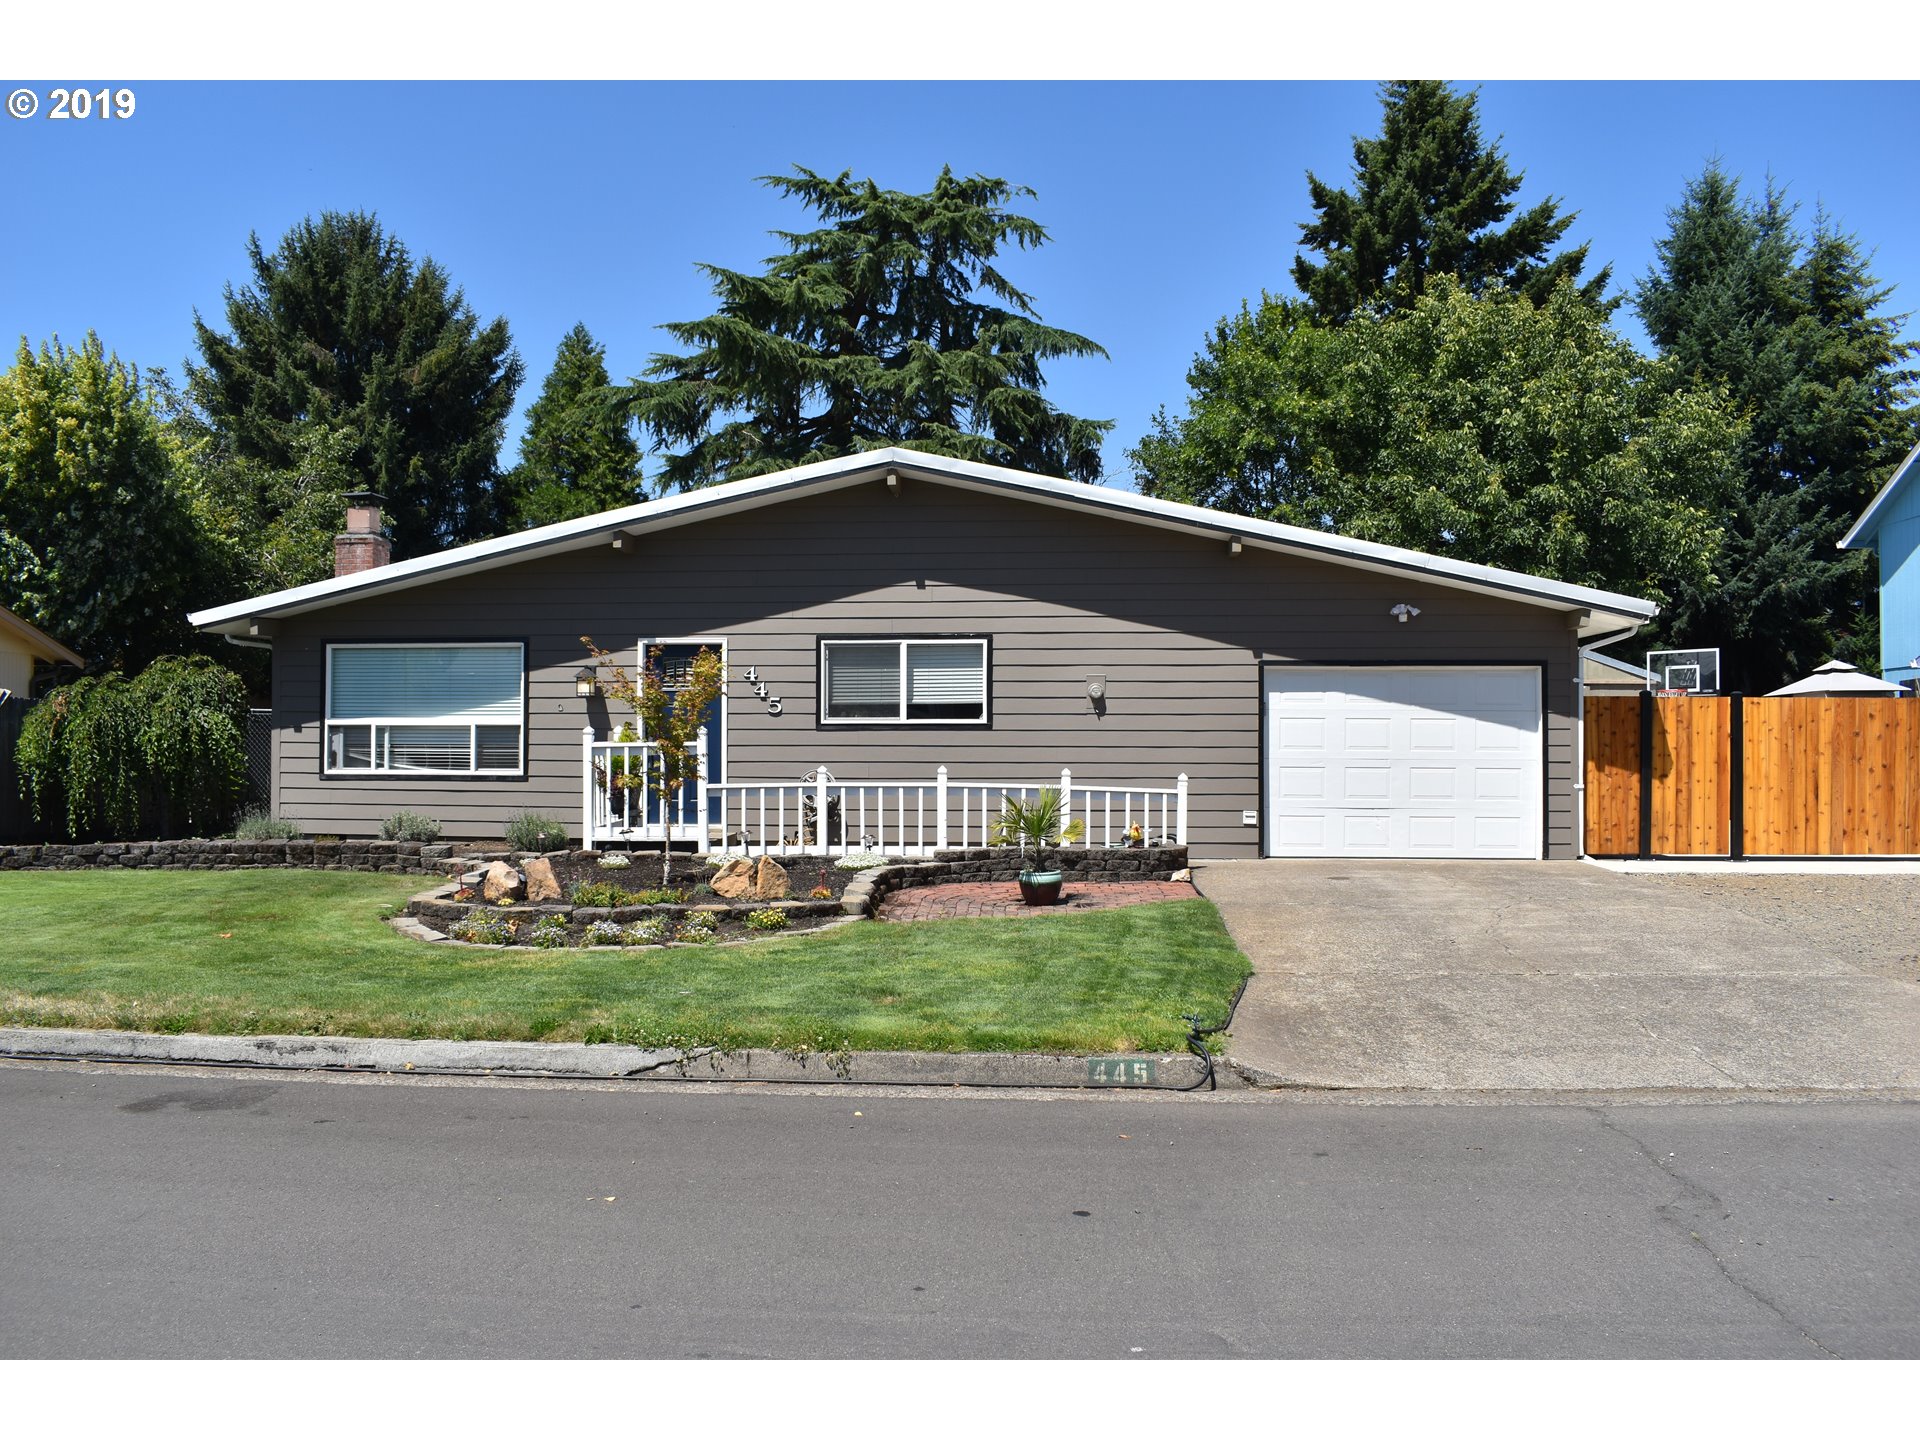 445 AUTUMN AVE Eugene Home Listings - Galand Haas Real Estate